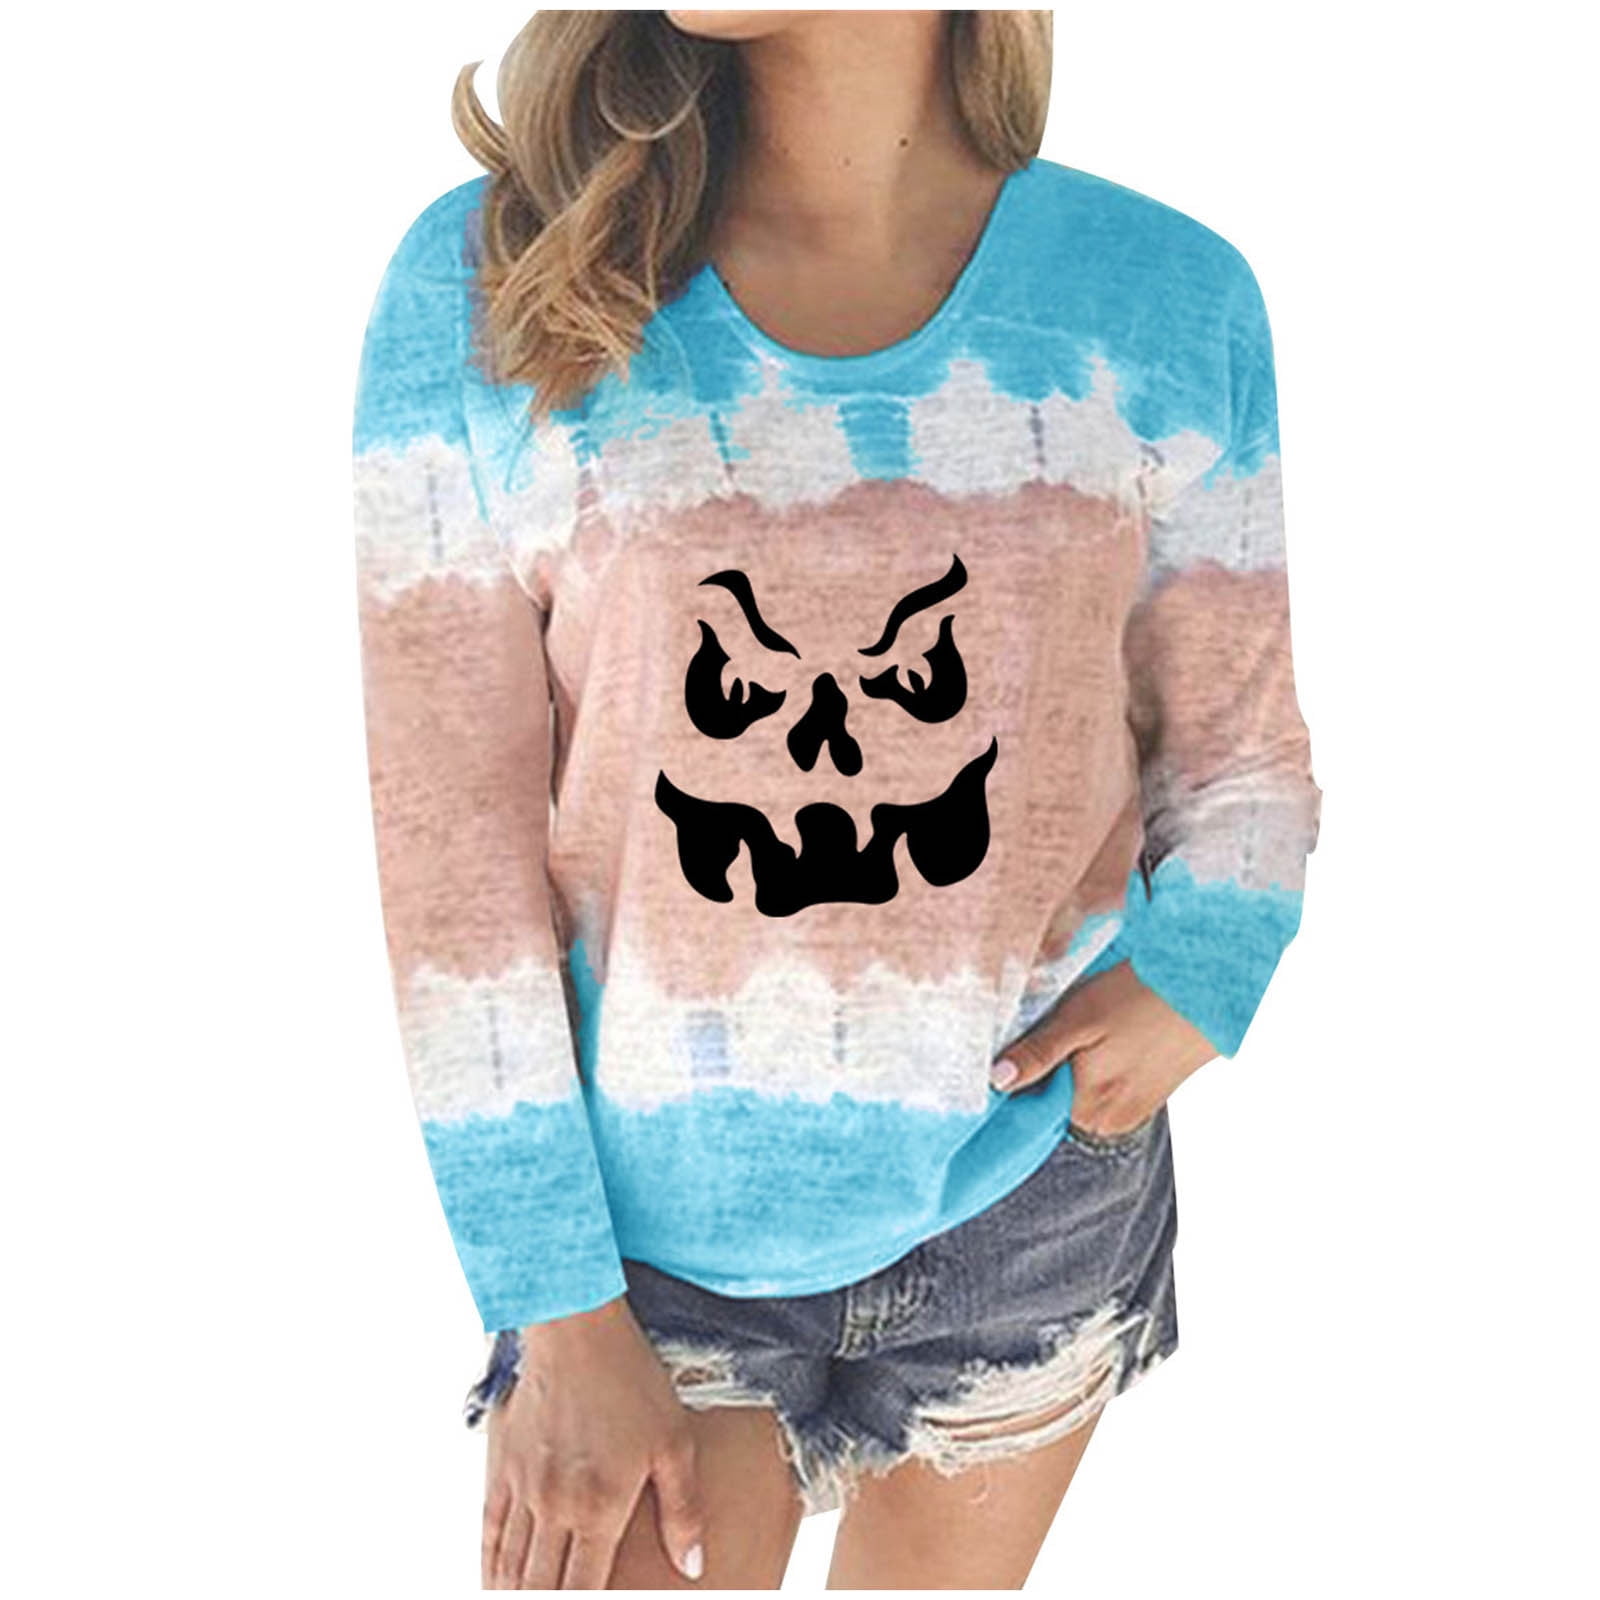 Meikosks Womens Plus Size Tie-dye Printing T Shirt Long Sleeves Blouse Tops Love Graphic Pullover 